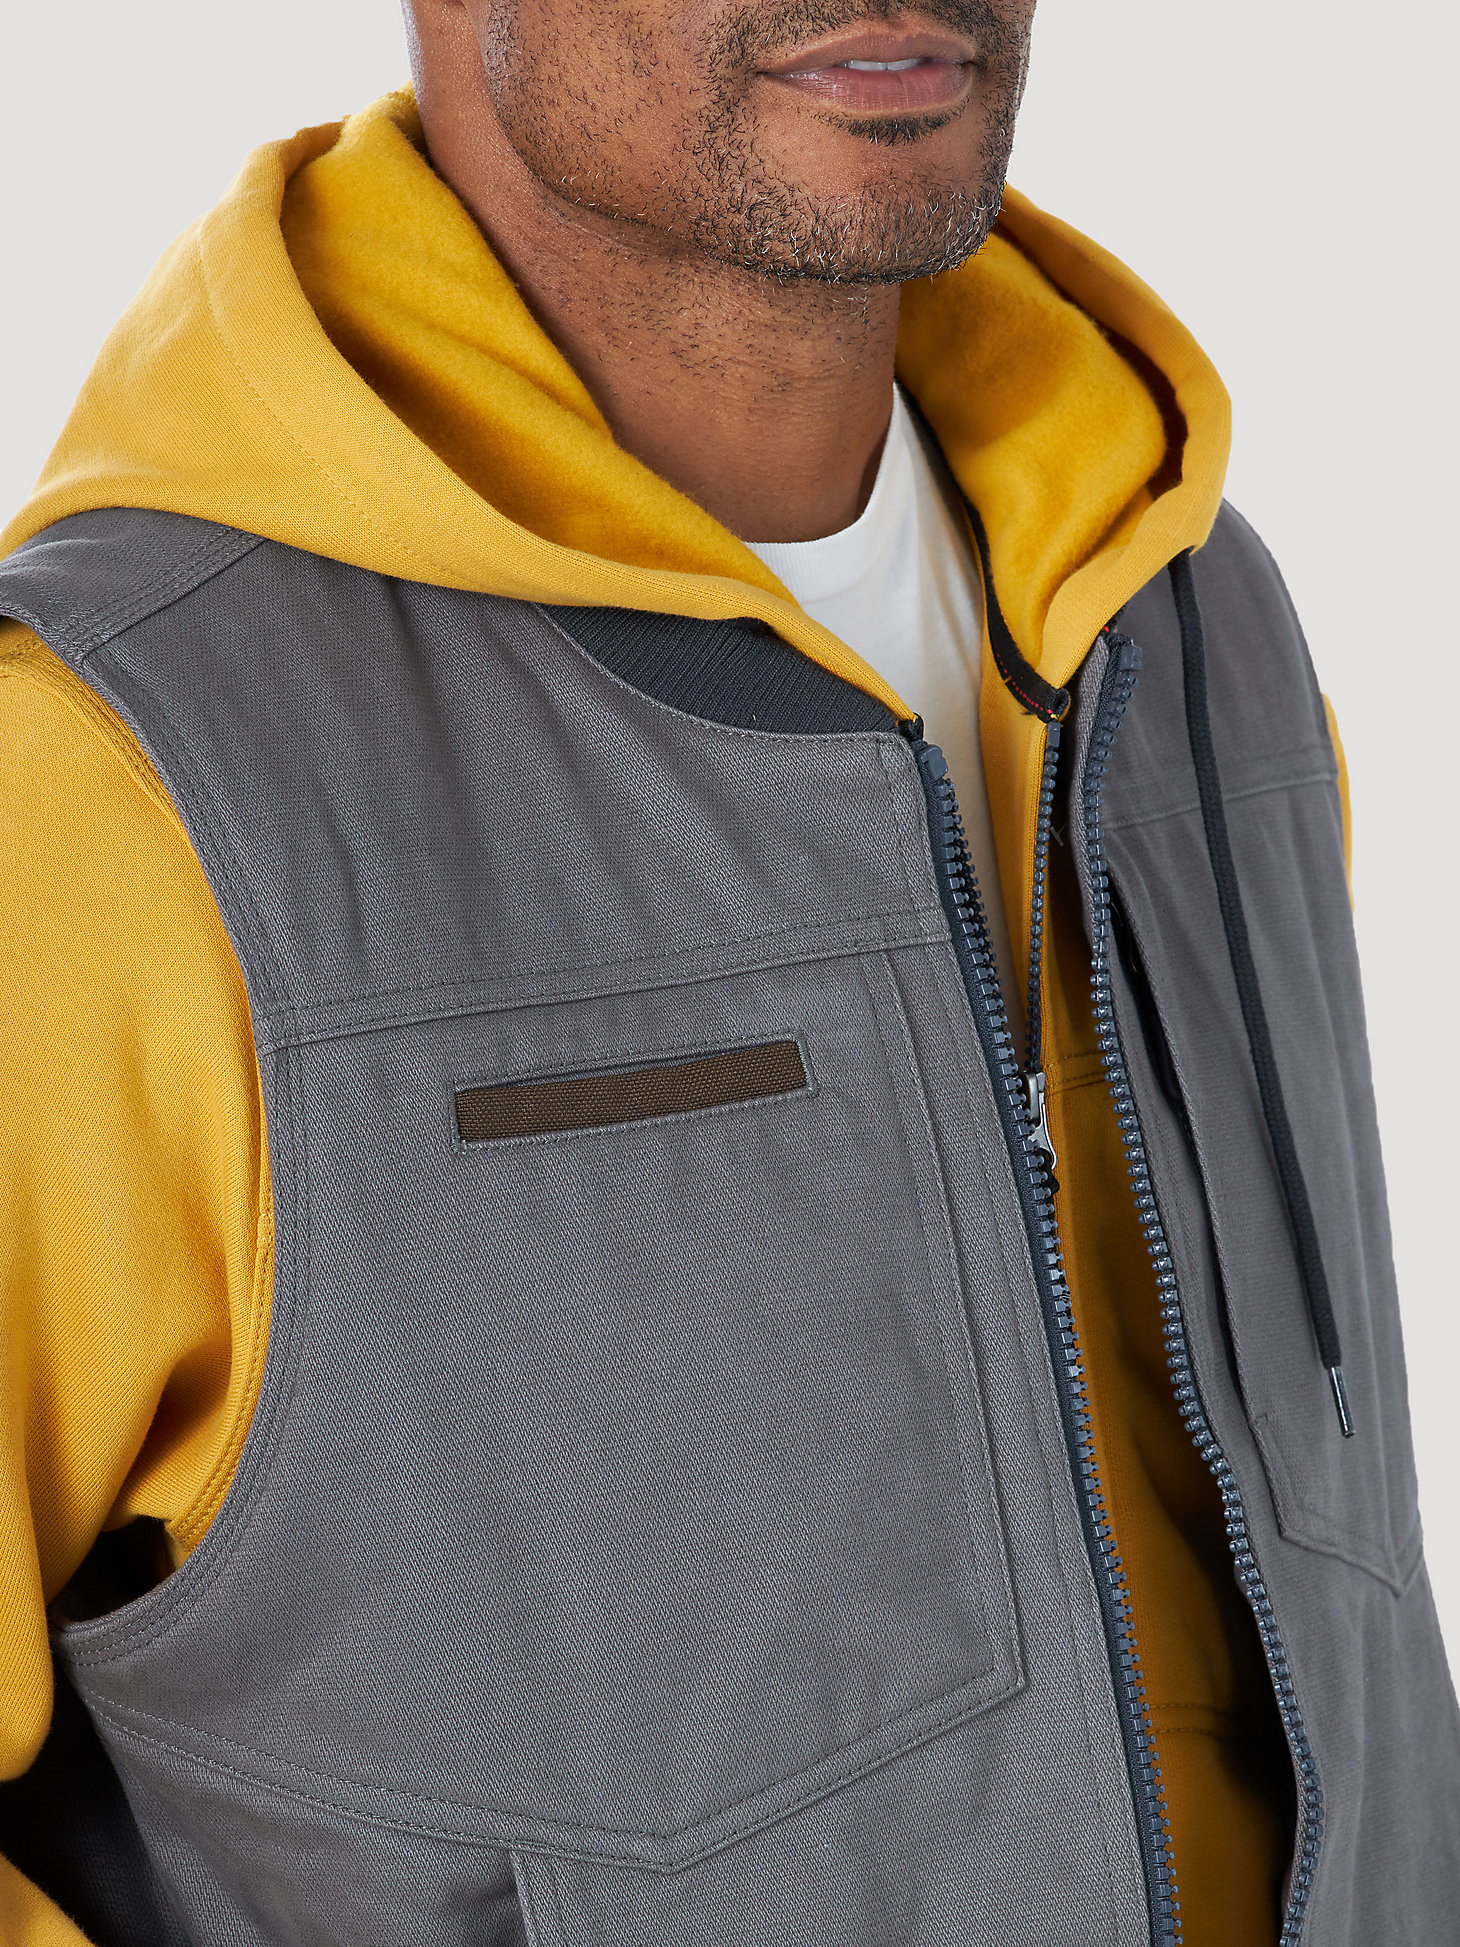 Wrangler® RIGGS Workwear® Tough Layers Insulated Work Vest in Granite Grey alternative view 2